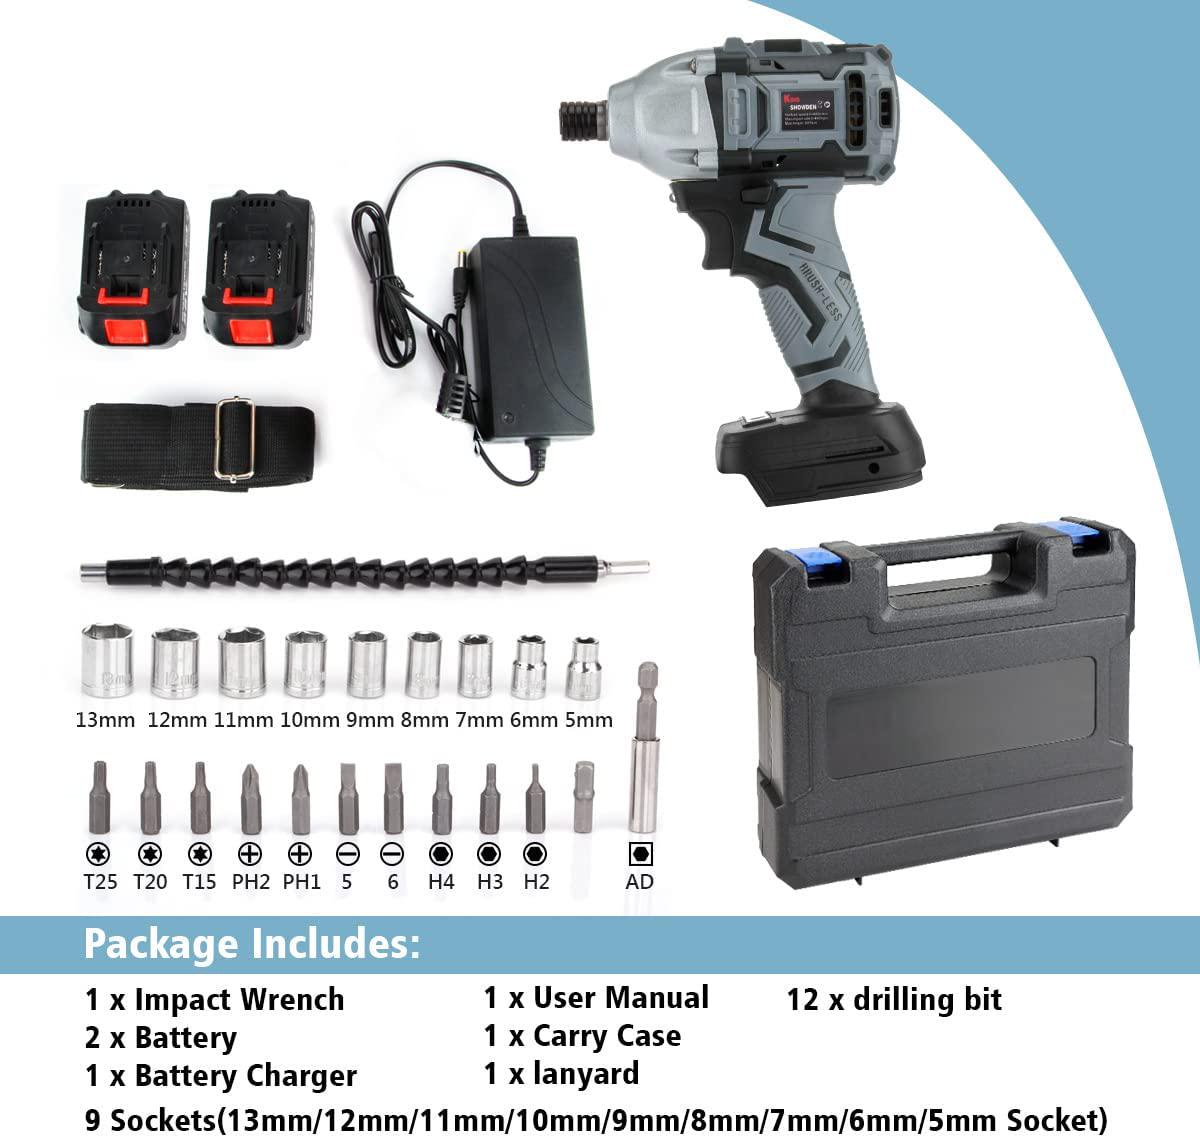 King showden, King showden Impact Driver with 2 Battery, Cordless Impact Driver 18V 5,000mAH Lithium Battery, 500Nm High Torque, Dual Speed Automatic Power Tool, 9 Sockets,12 Drilling bit, Carry Case